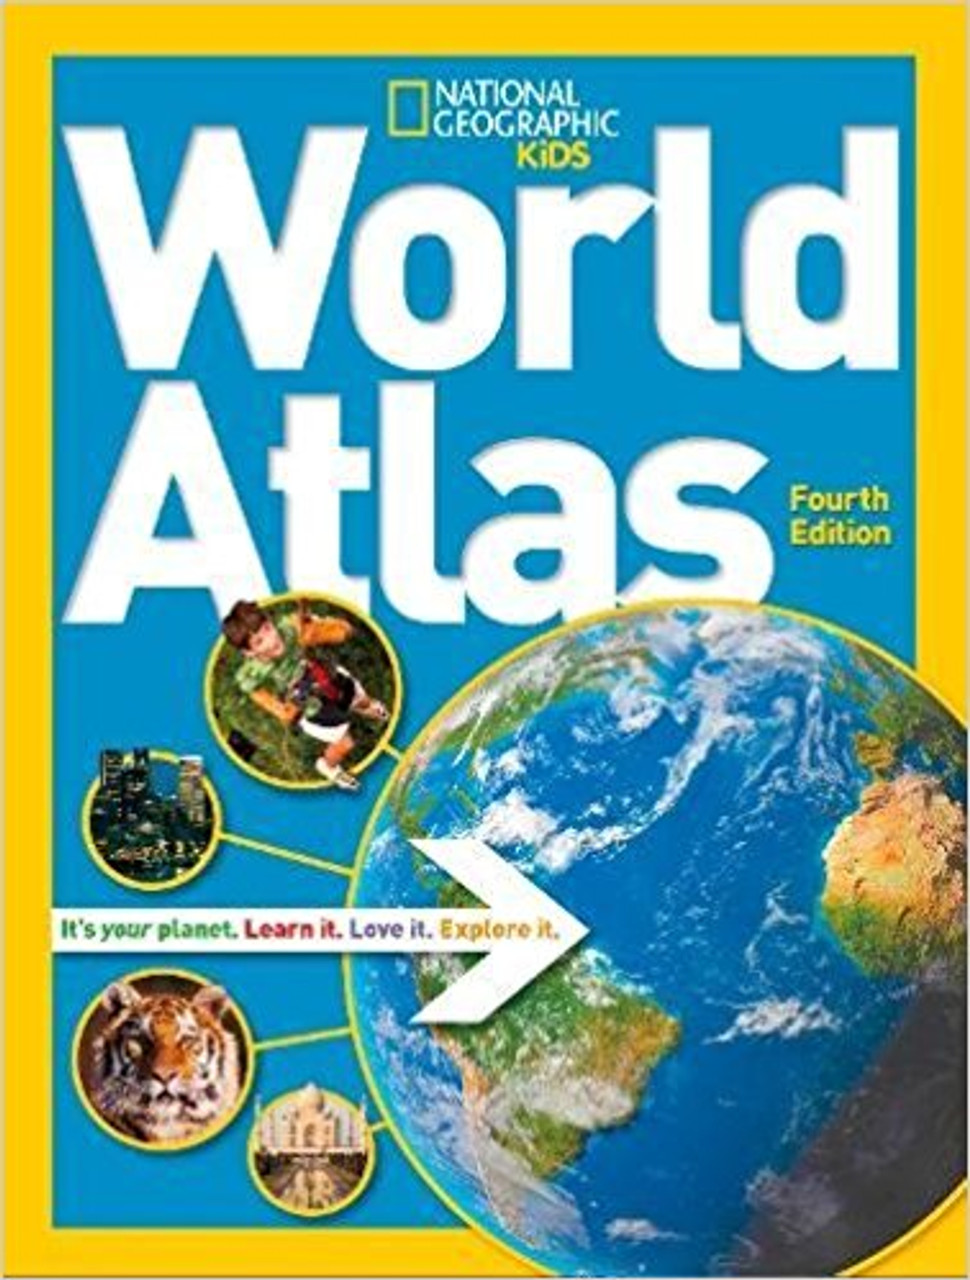 World Atlas by National Geographic Kids